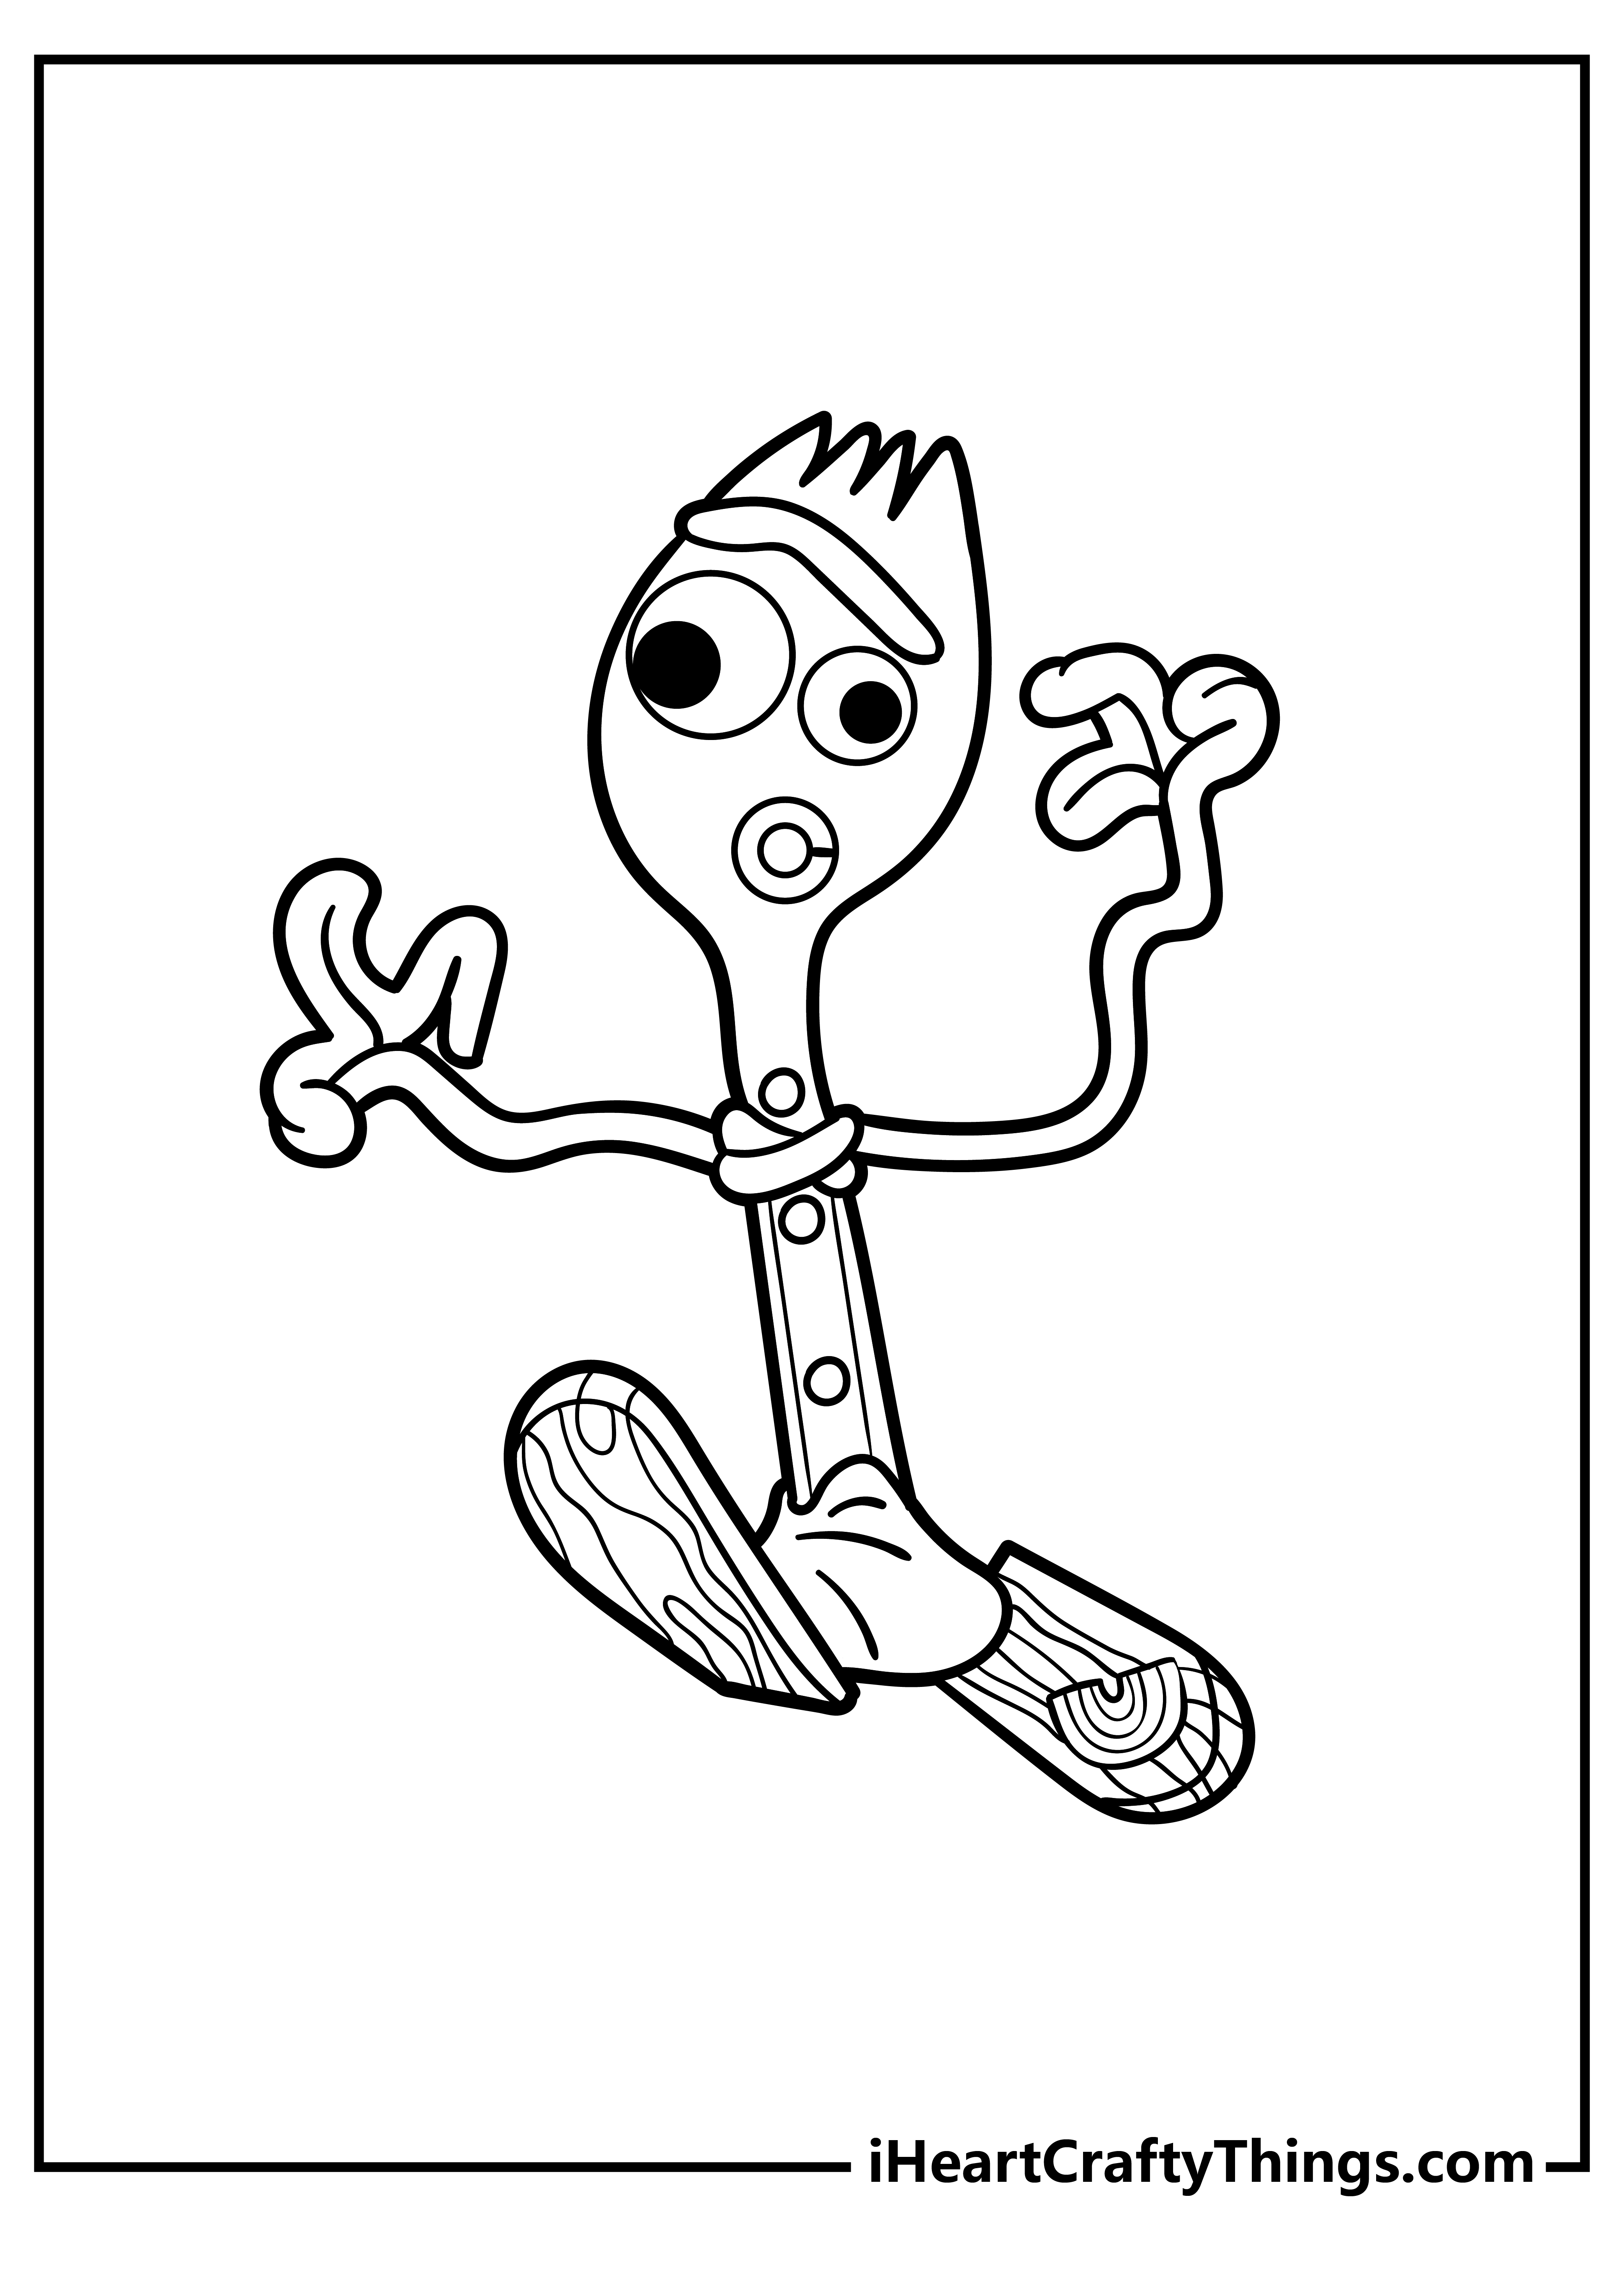 Toy Story Coloring Pages for preschoolers free printable